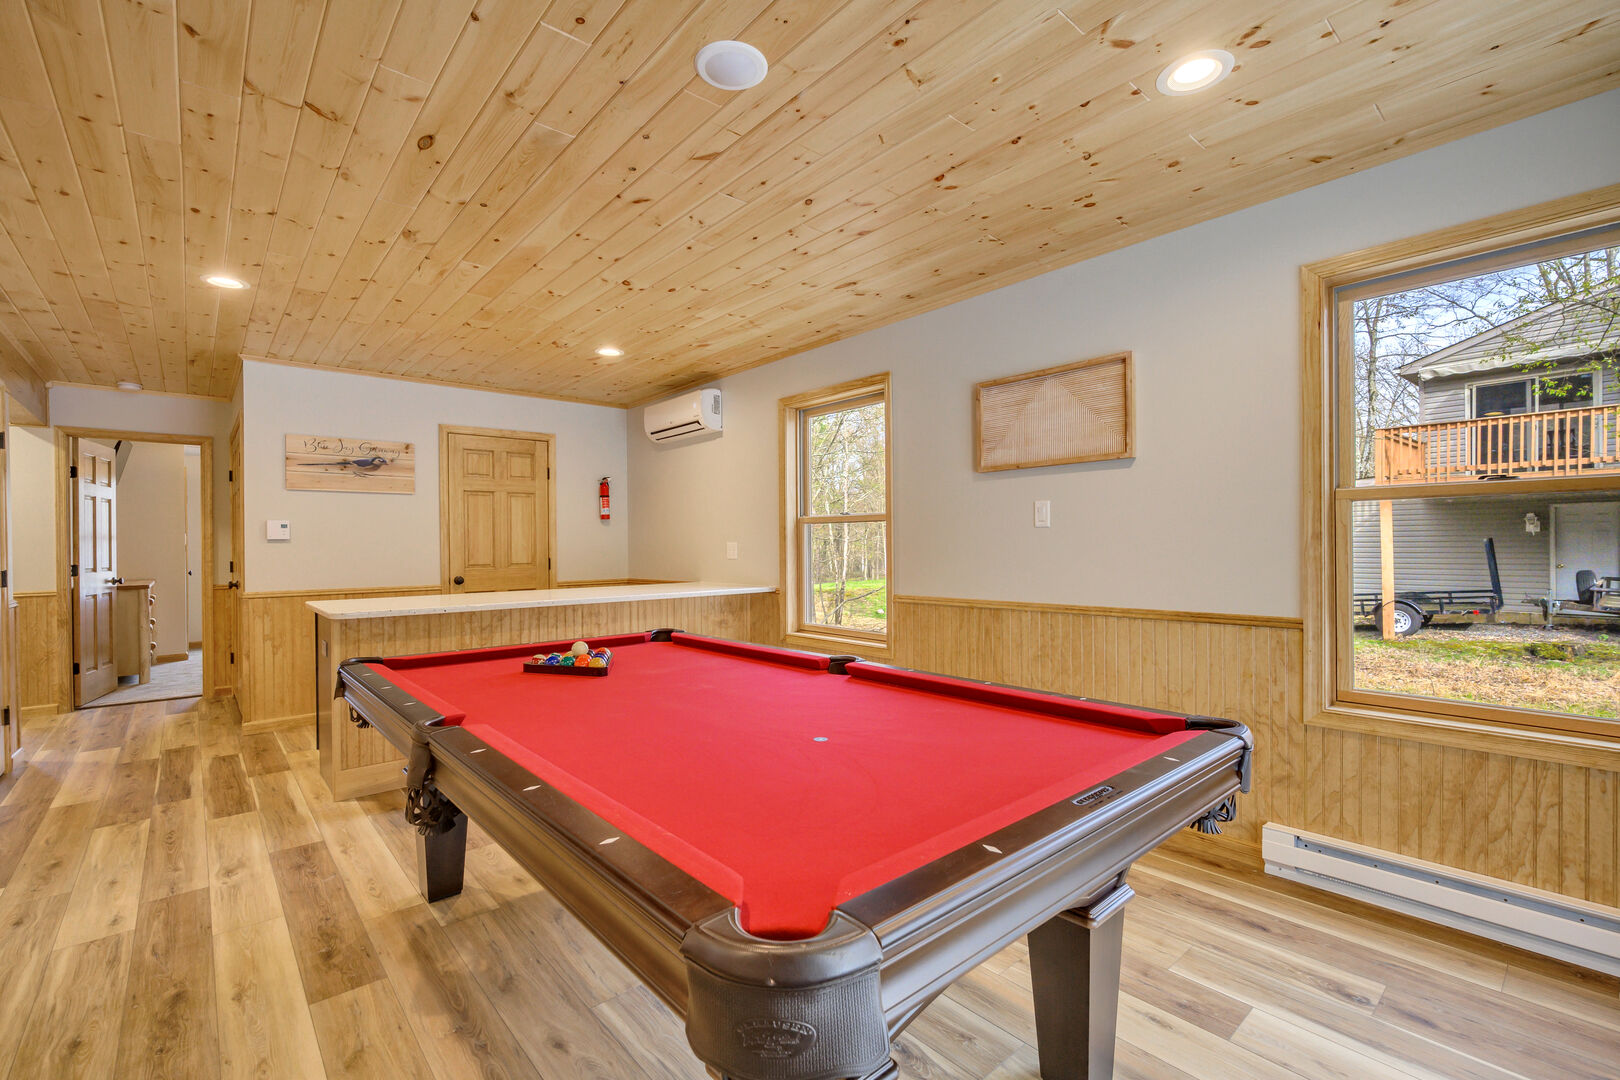 Rack 'em up. 1st Floor Game Room with Pool Table and Bar.